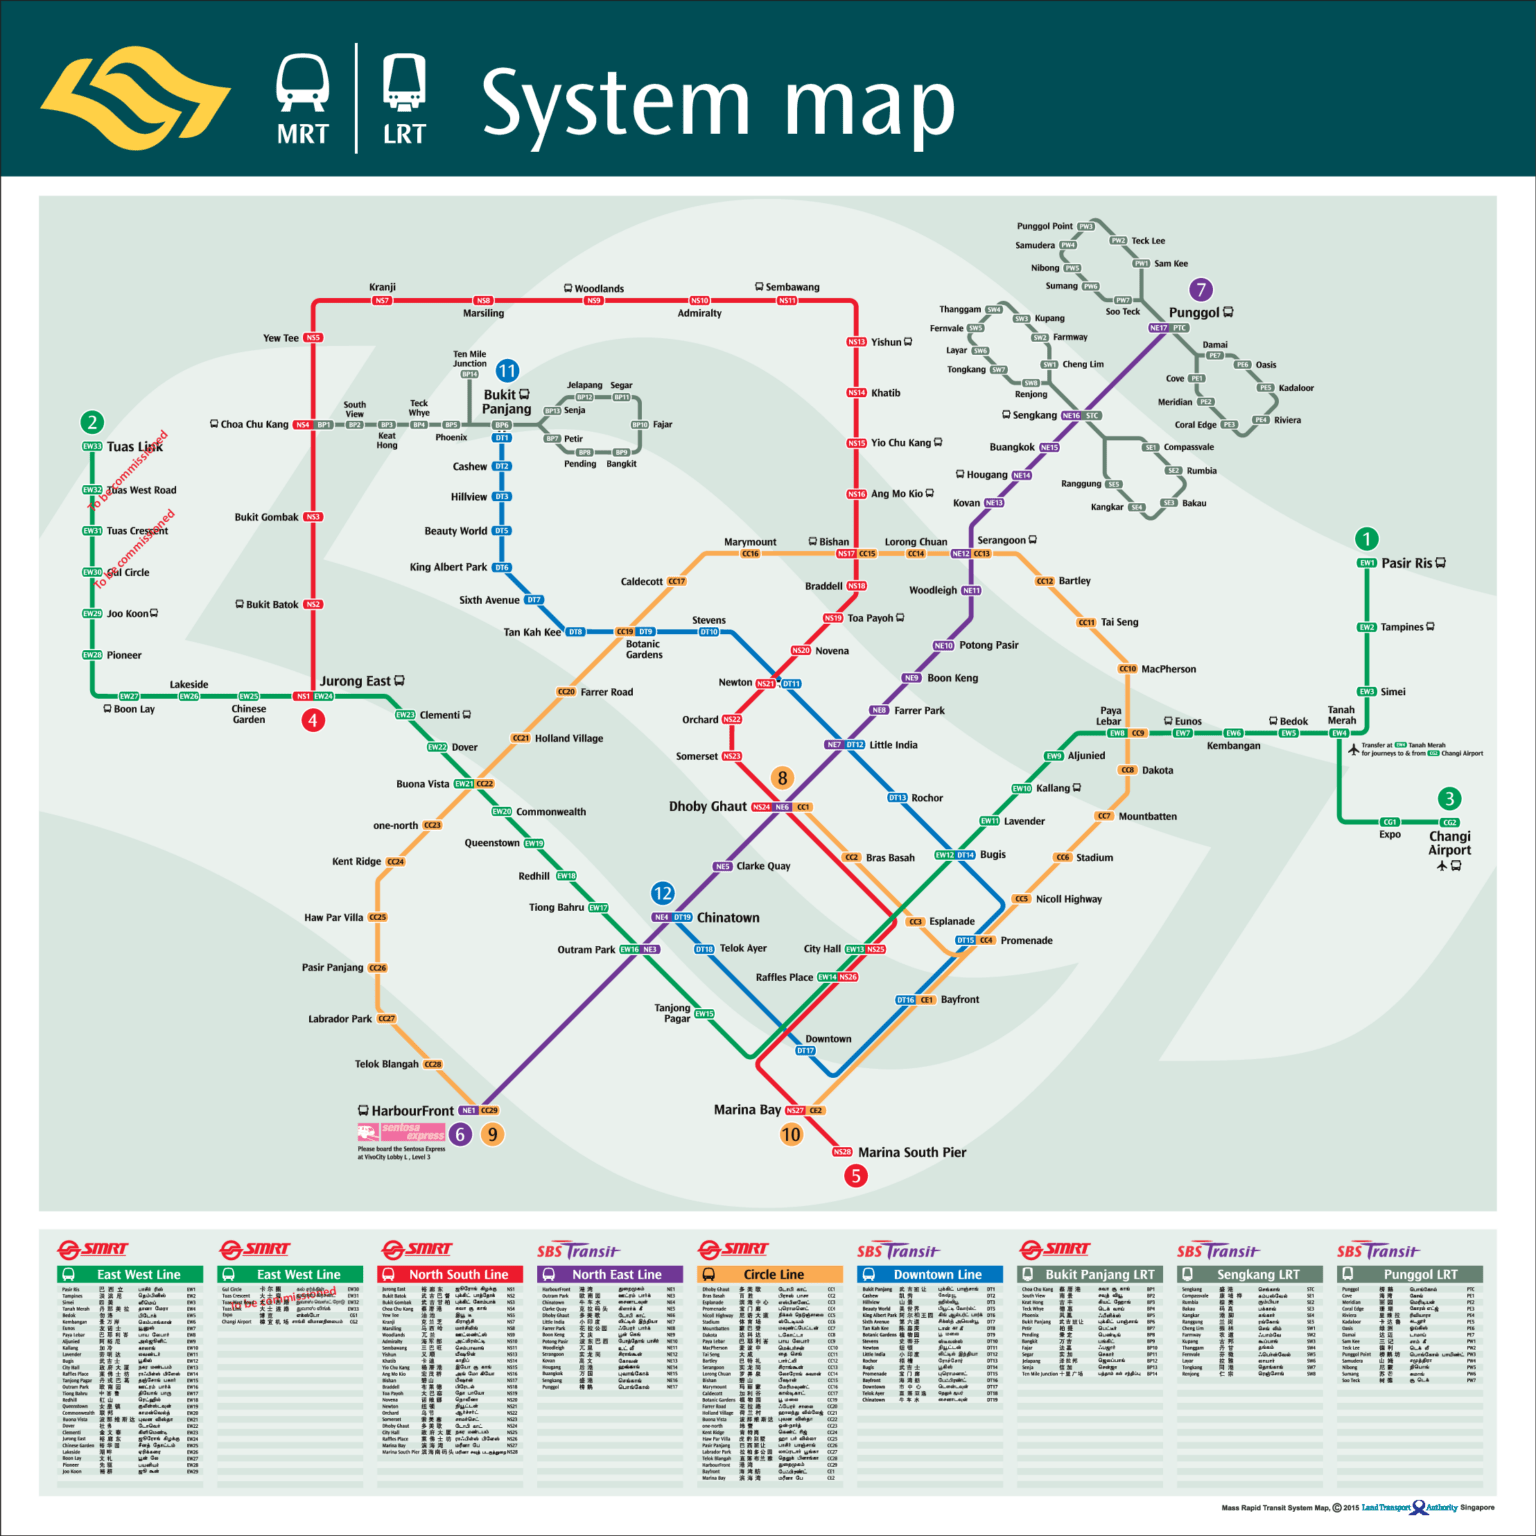 MRT Map Singapore - SG line maps in all languages